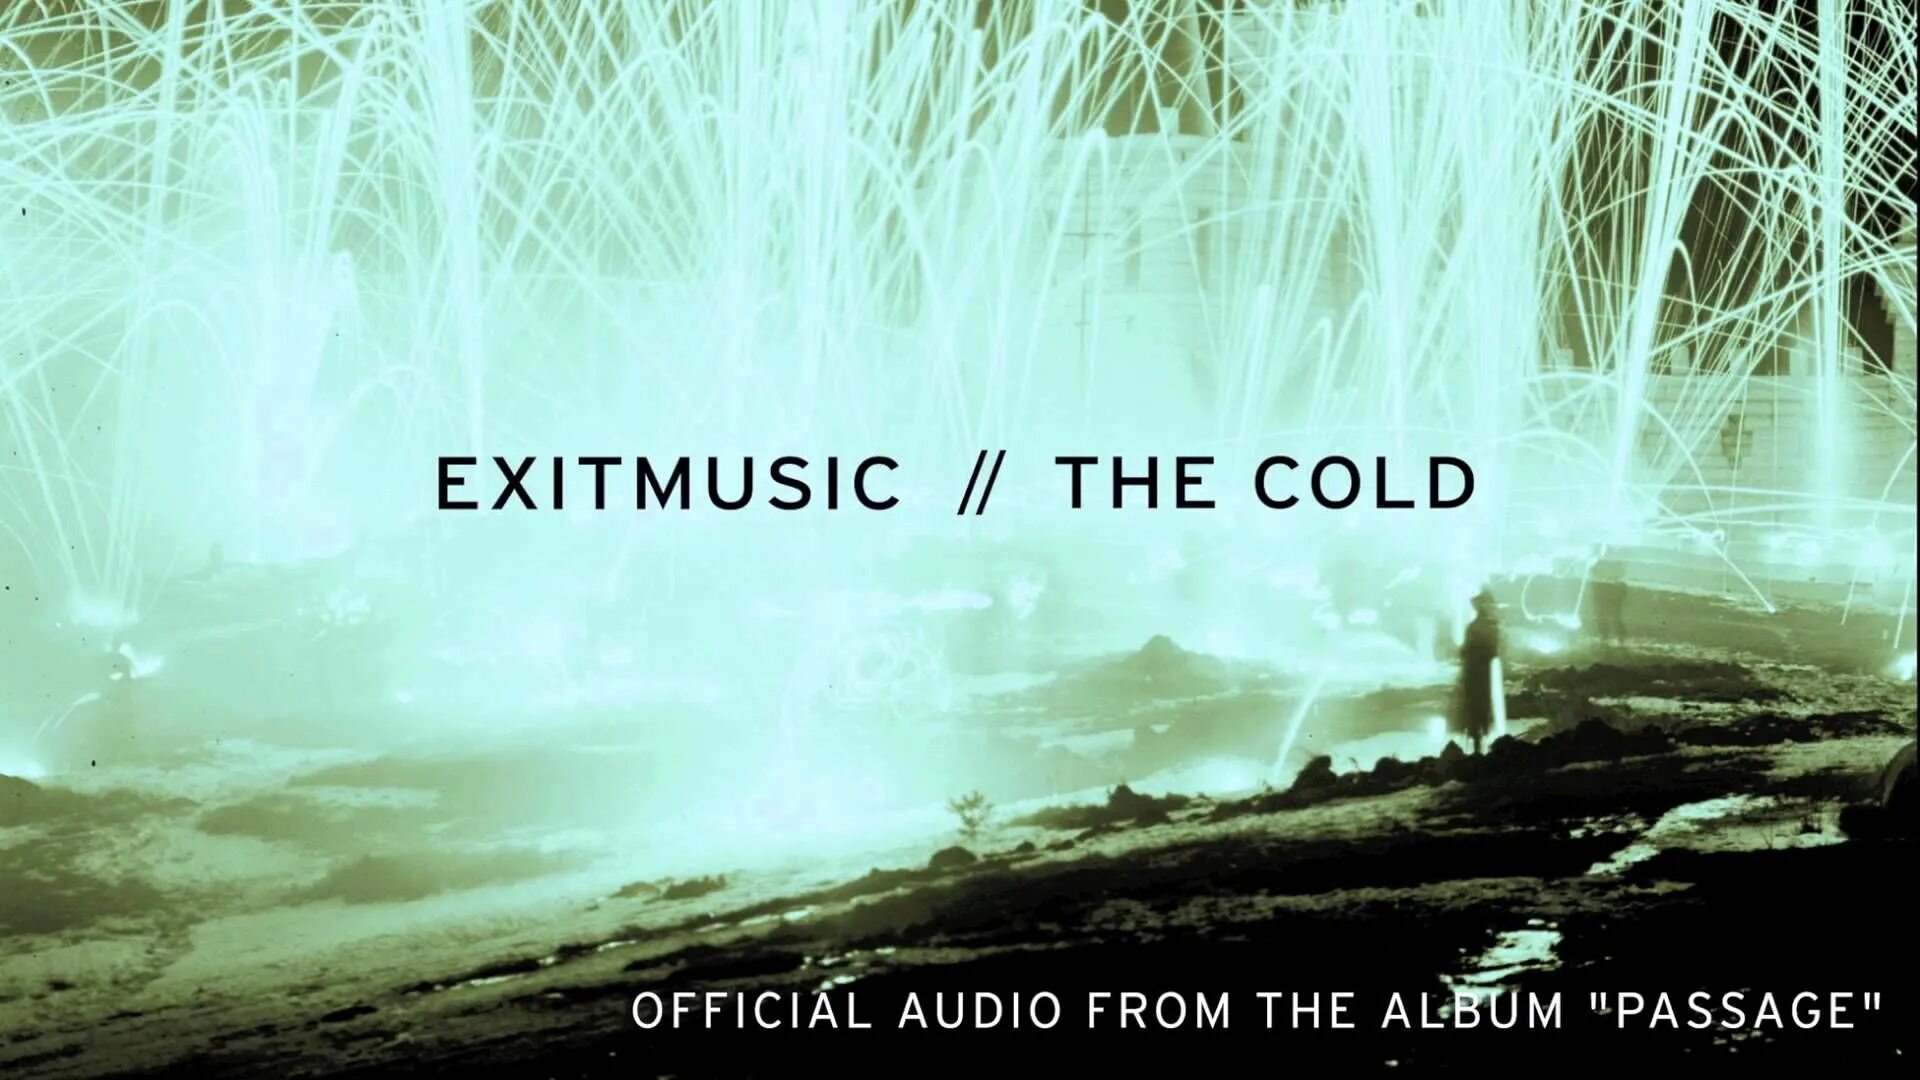 The Cold Exitmusic. Exitmusic the Cold перевод песни. Exitmusic from Silence. Exit Music. Музыка cold